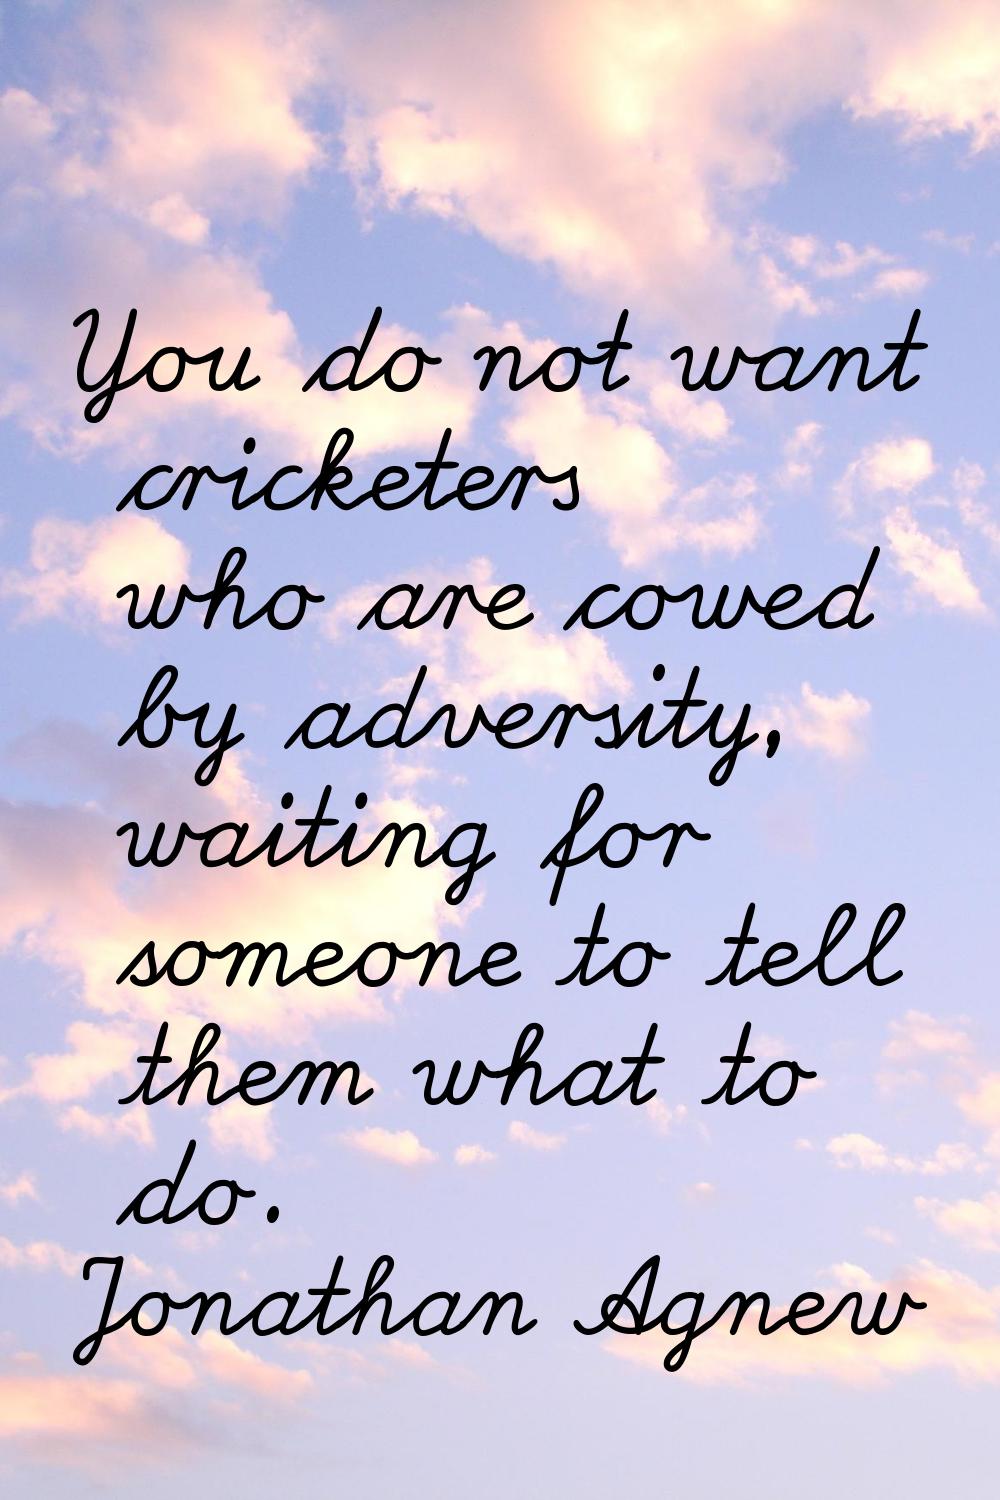 You do not want cricketers who are cowed by adversity, waiting for someone to tell them what to do.